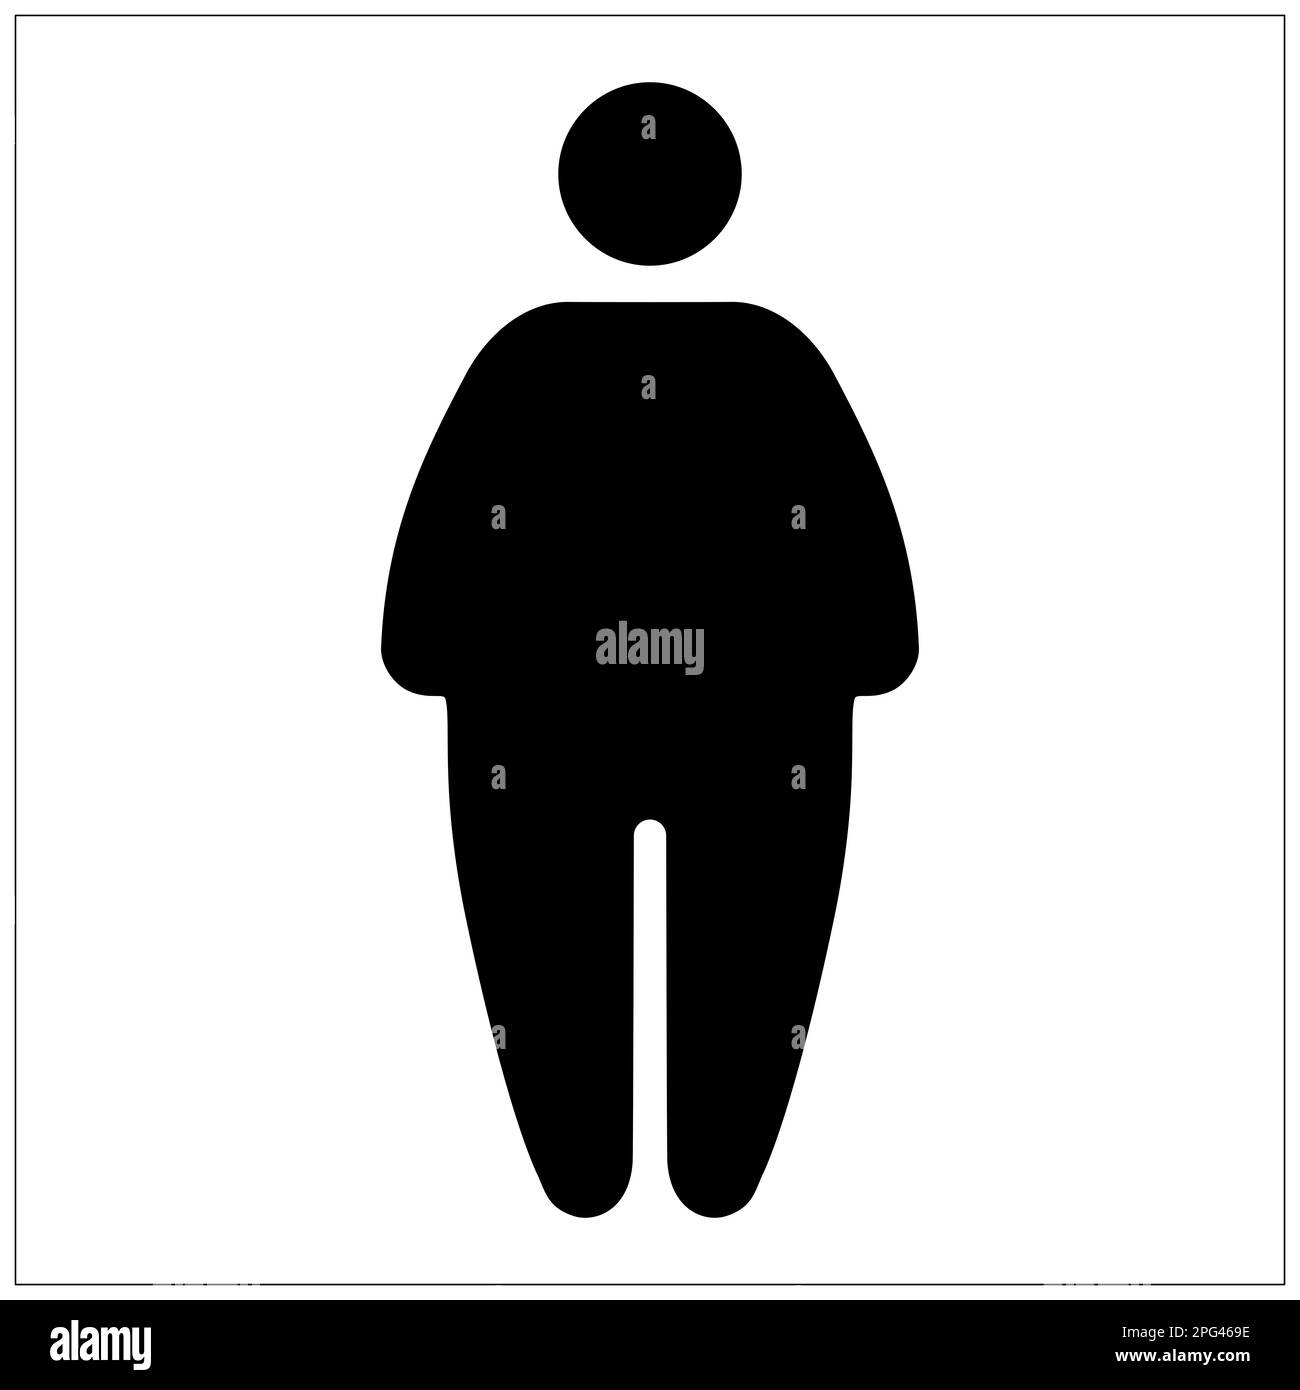 obesity clipart black and white